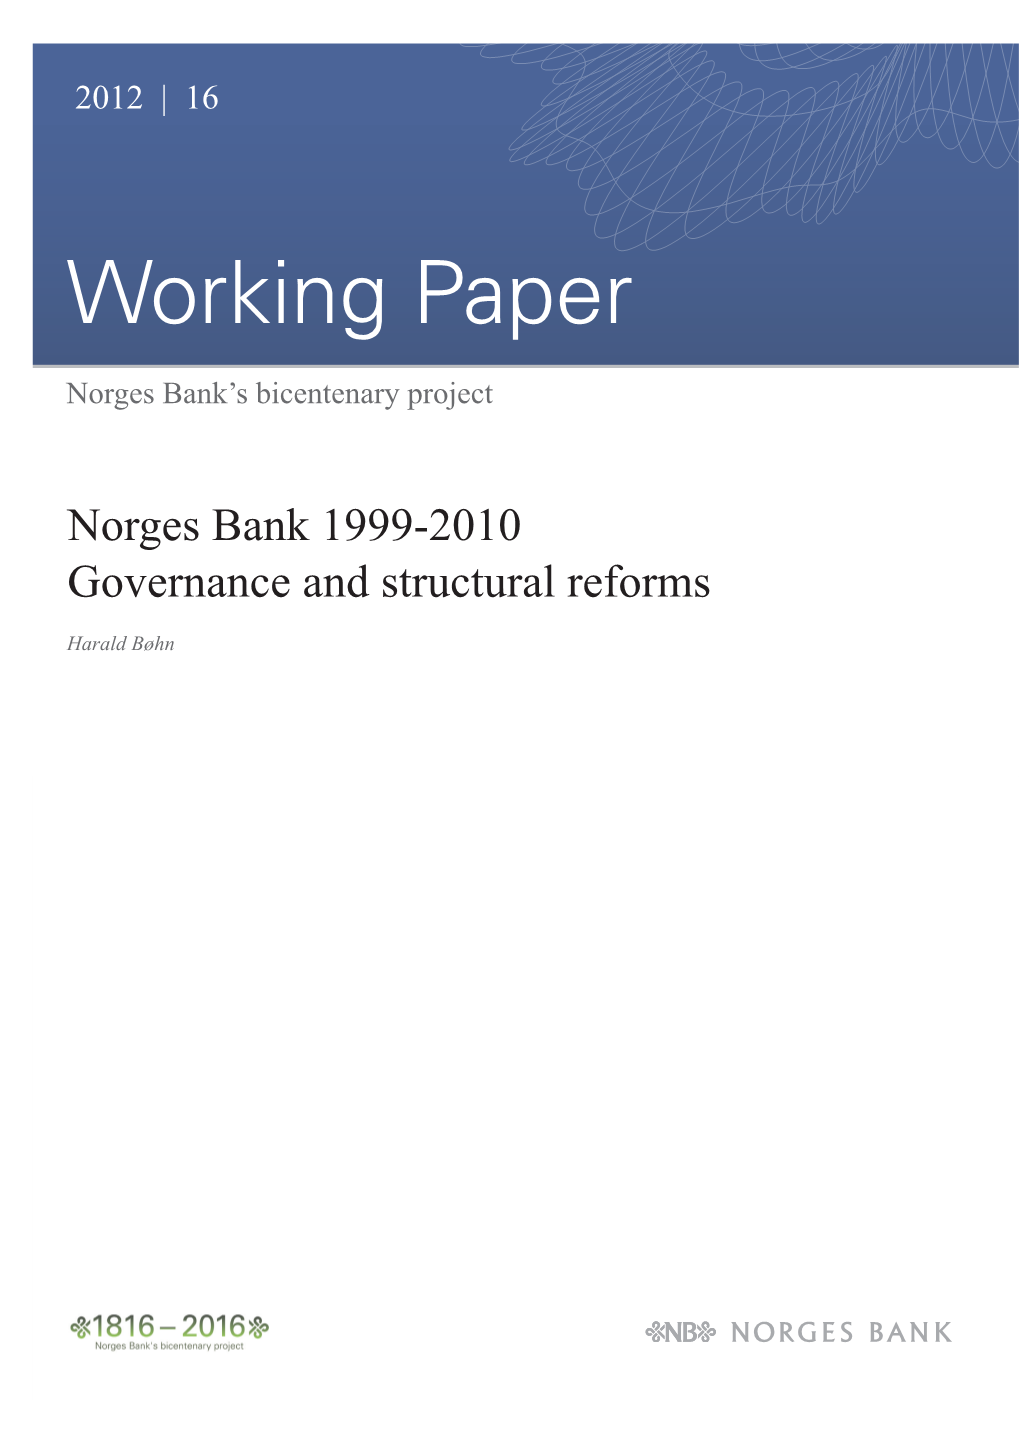 Norges Bank Working Paper 2012/16